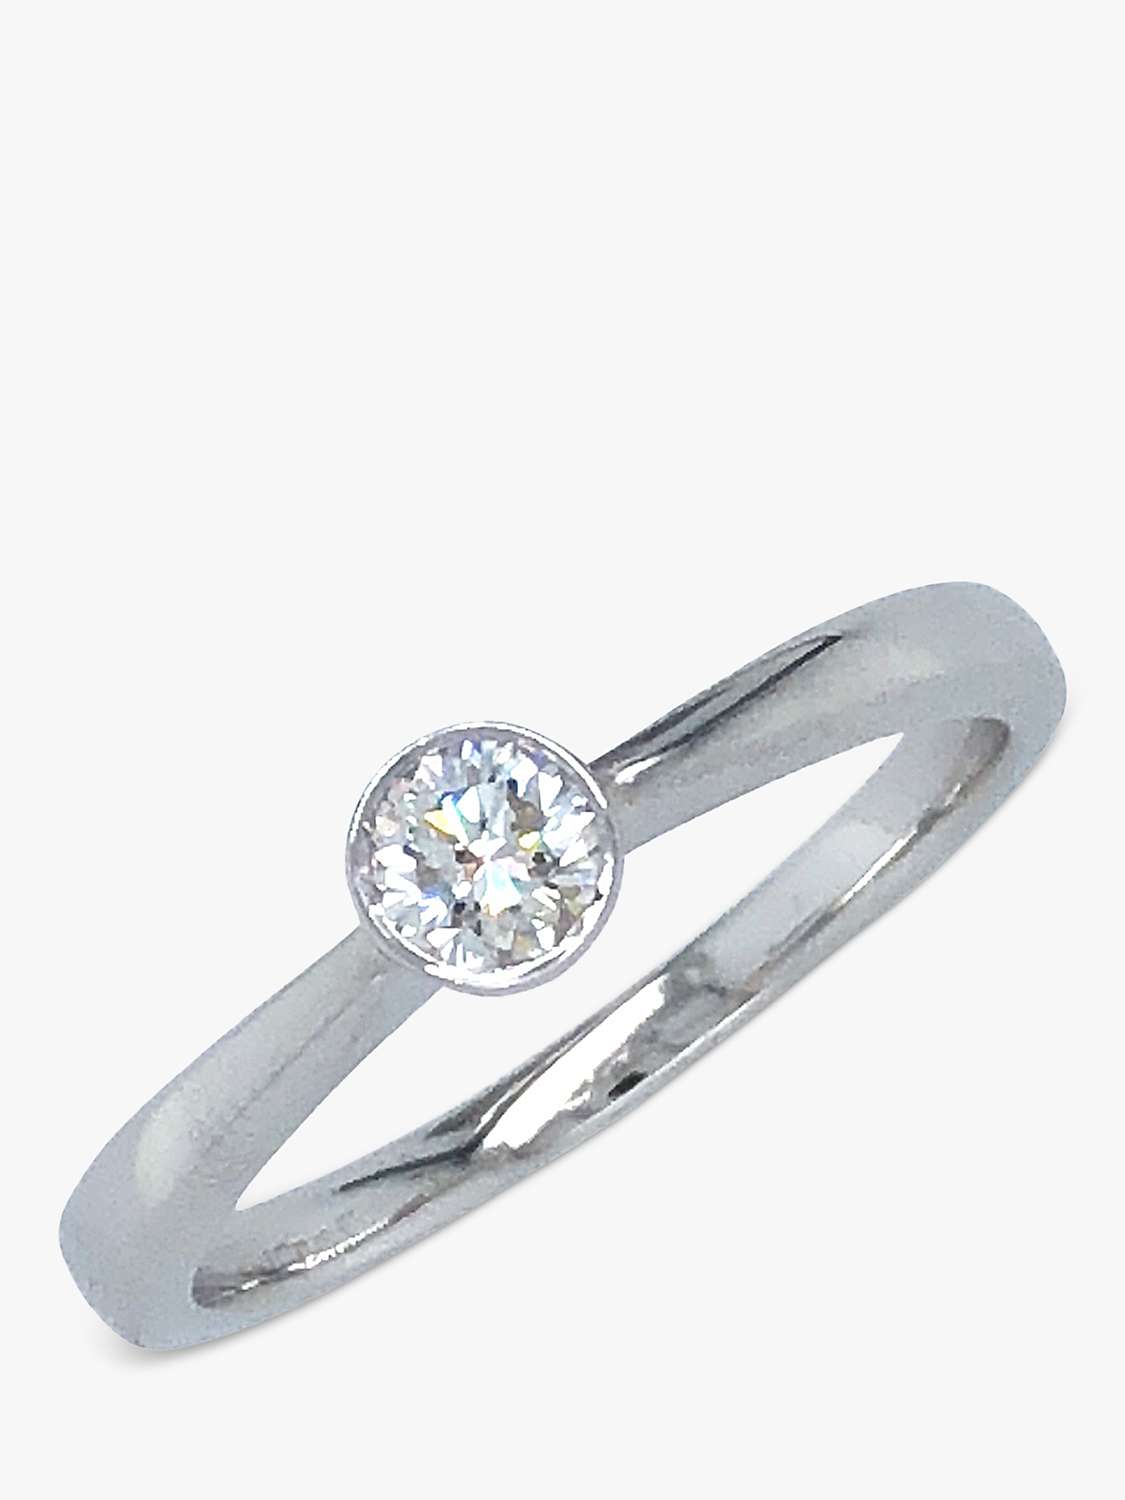 Buy VF Jewellery 18ct White Gold Second Hand Diamond Ring Online at johnlewis.com